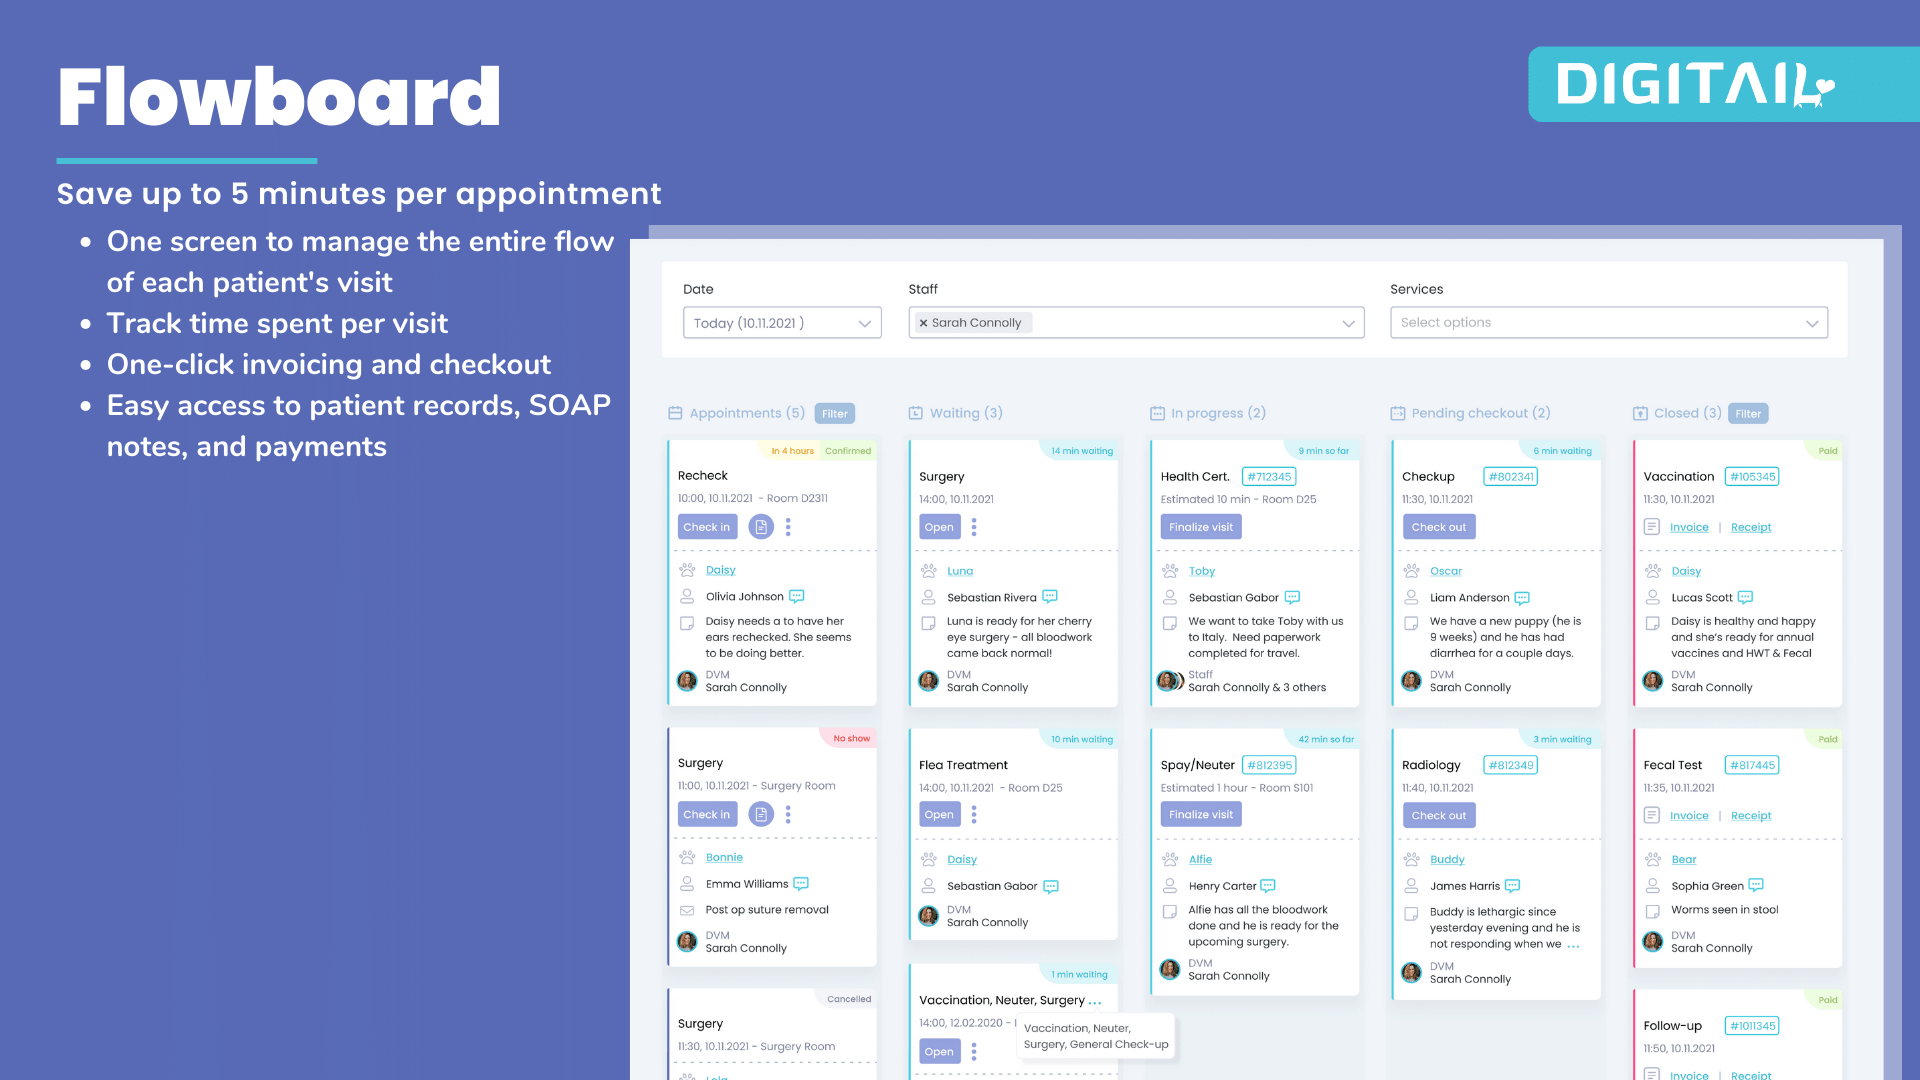 One screen to manage the entire flow of each patient's visit